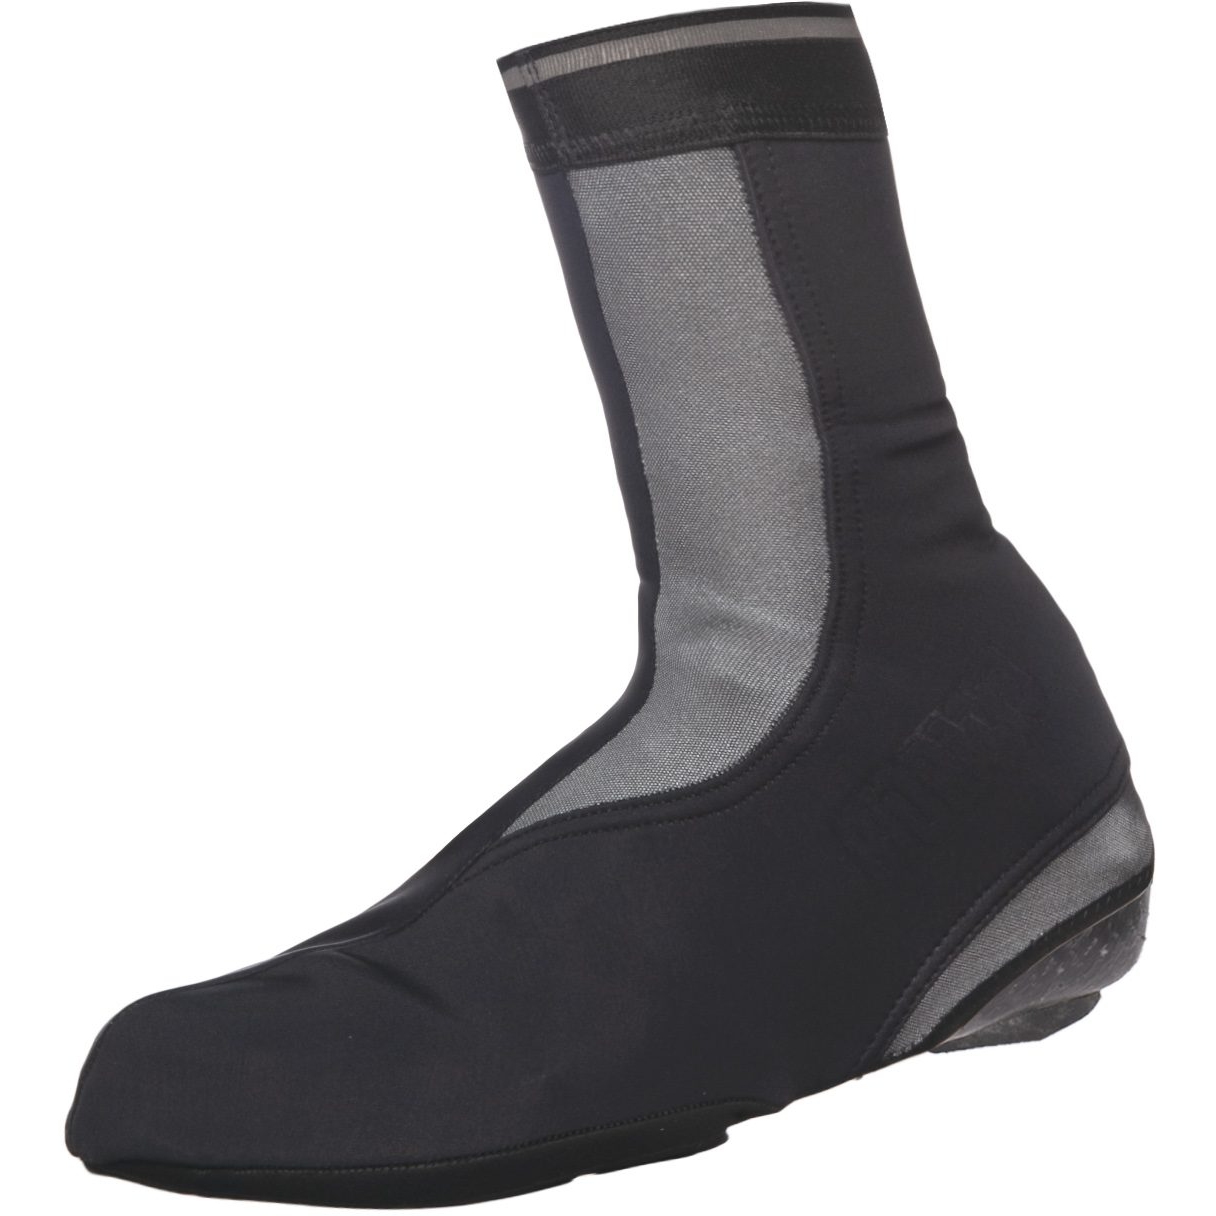 Picture of Bioracer Overshoe One Tempest Protect Pixel - black / grey